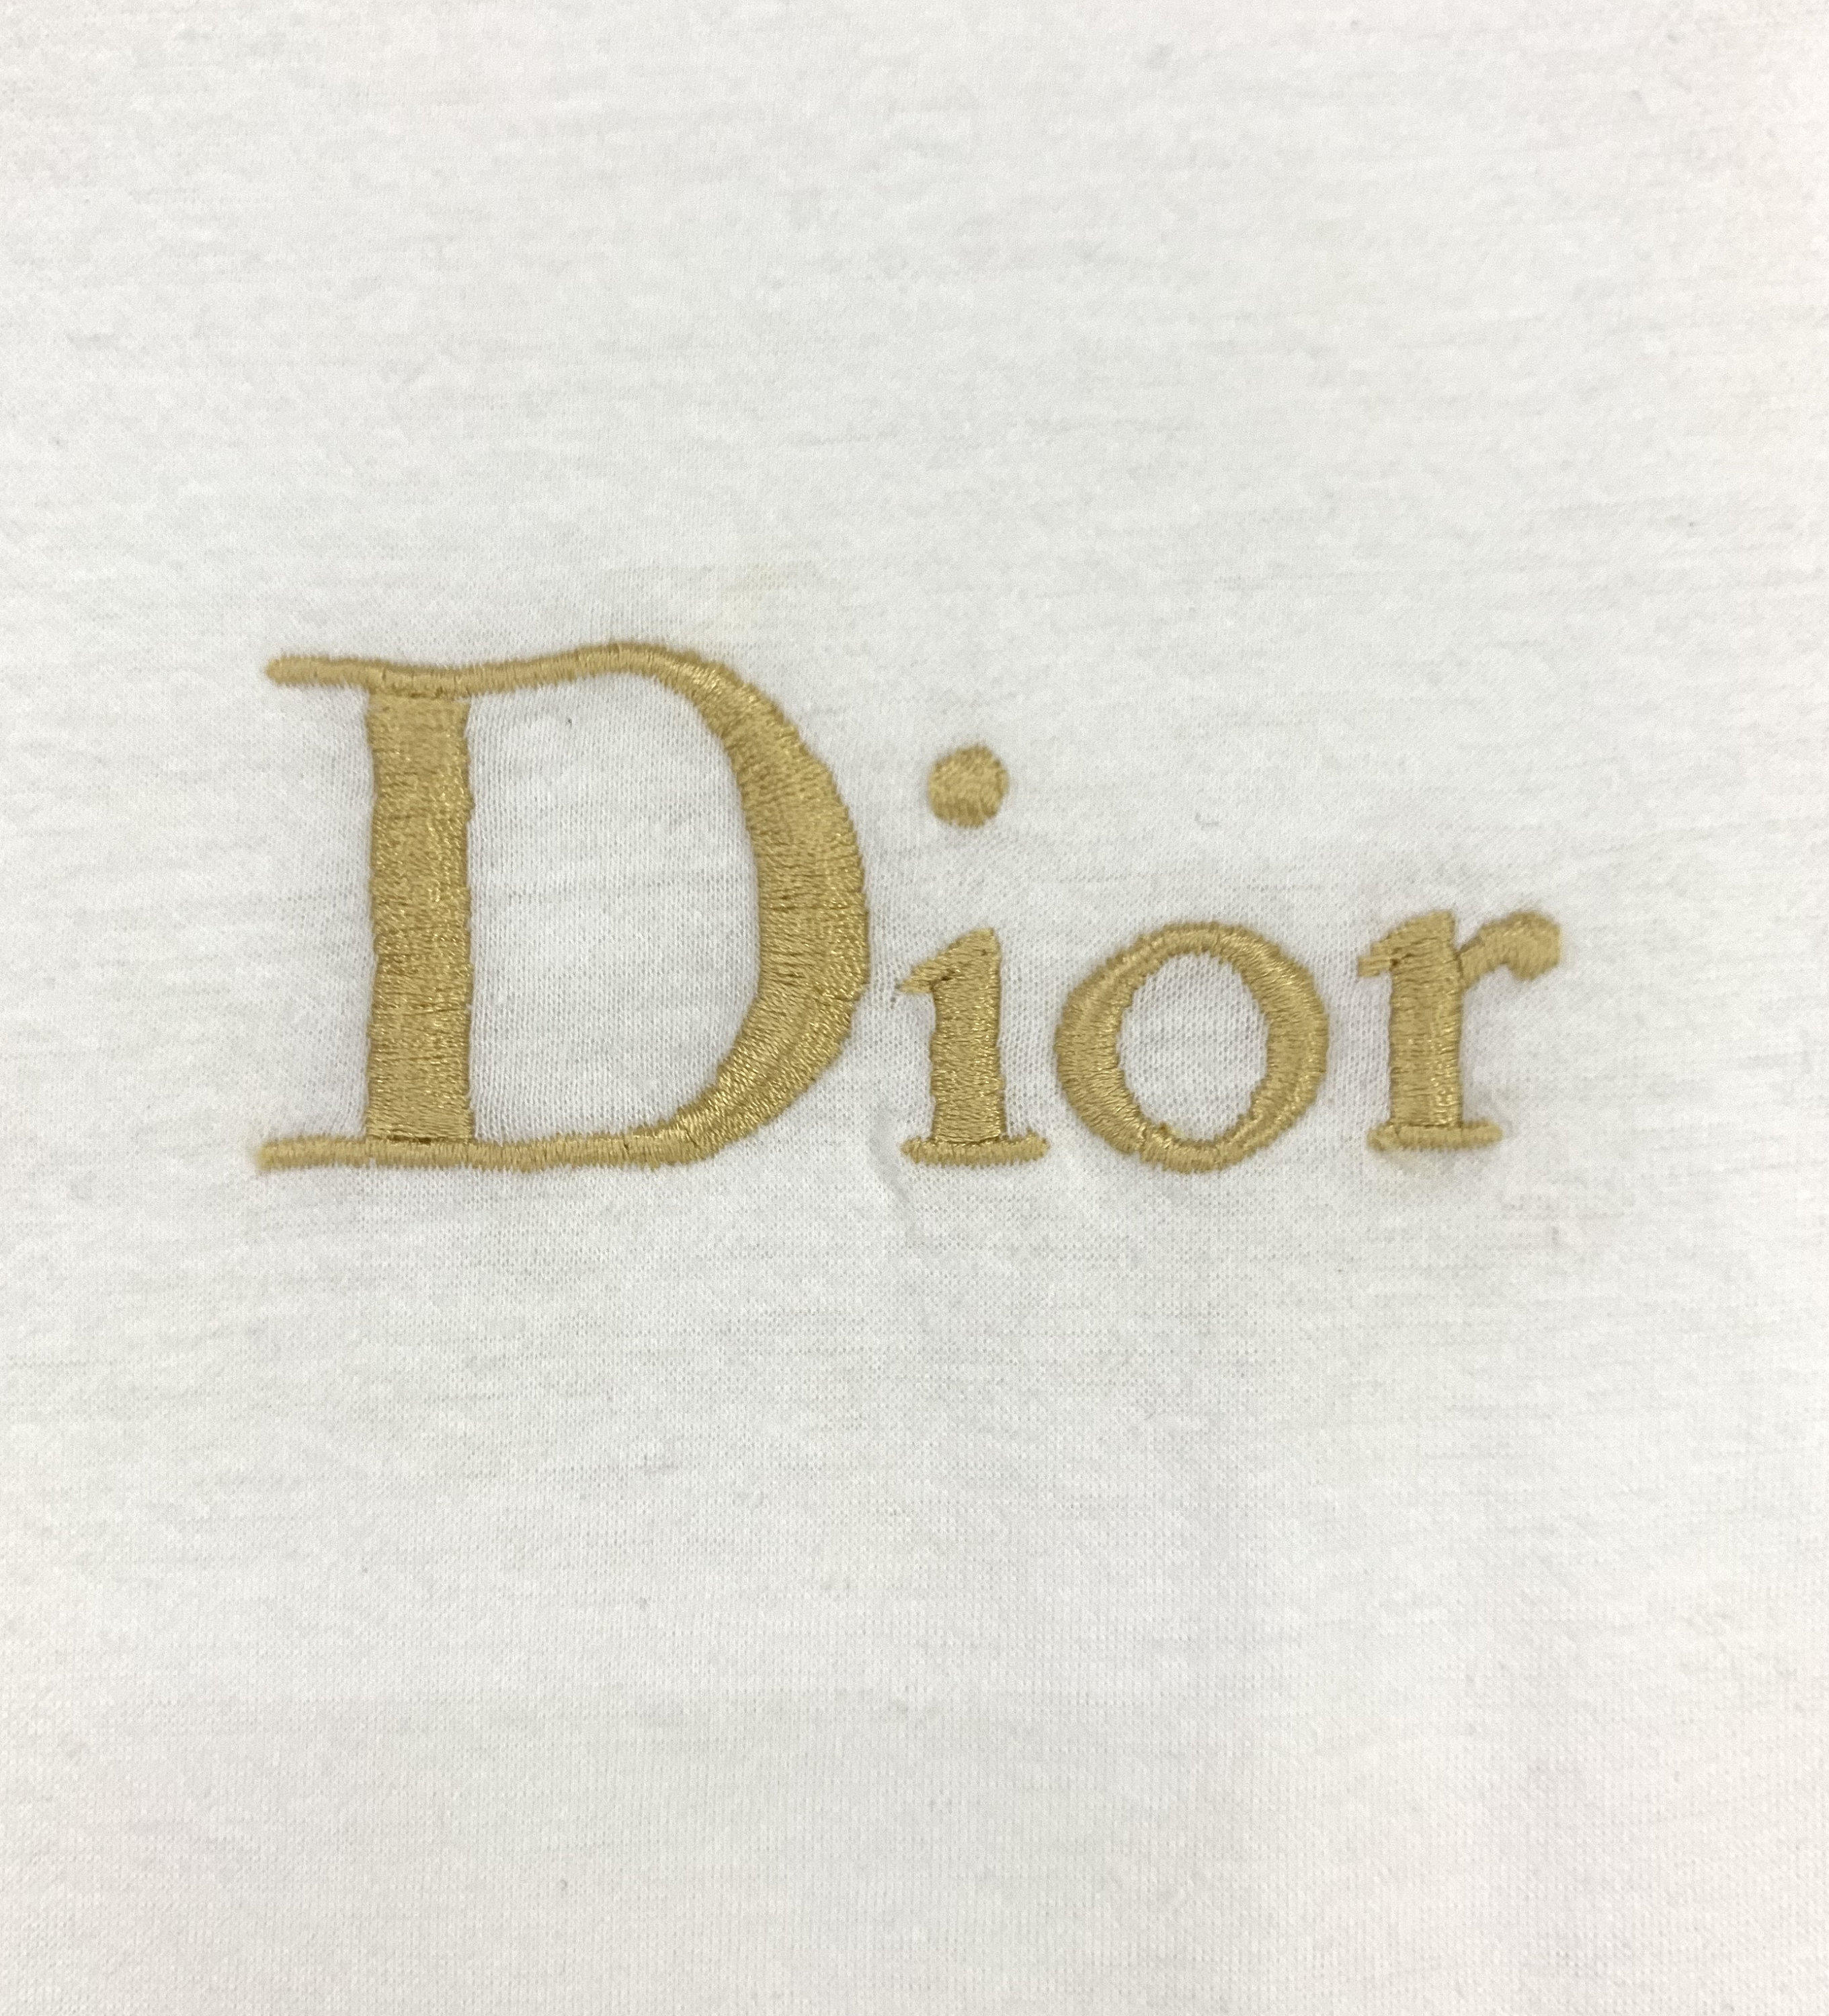 Rare Christian Dior spellout embroidered logo vintage shirt | Etsy